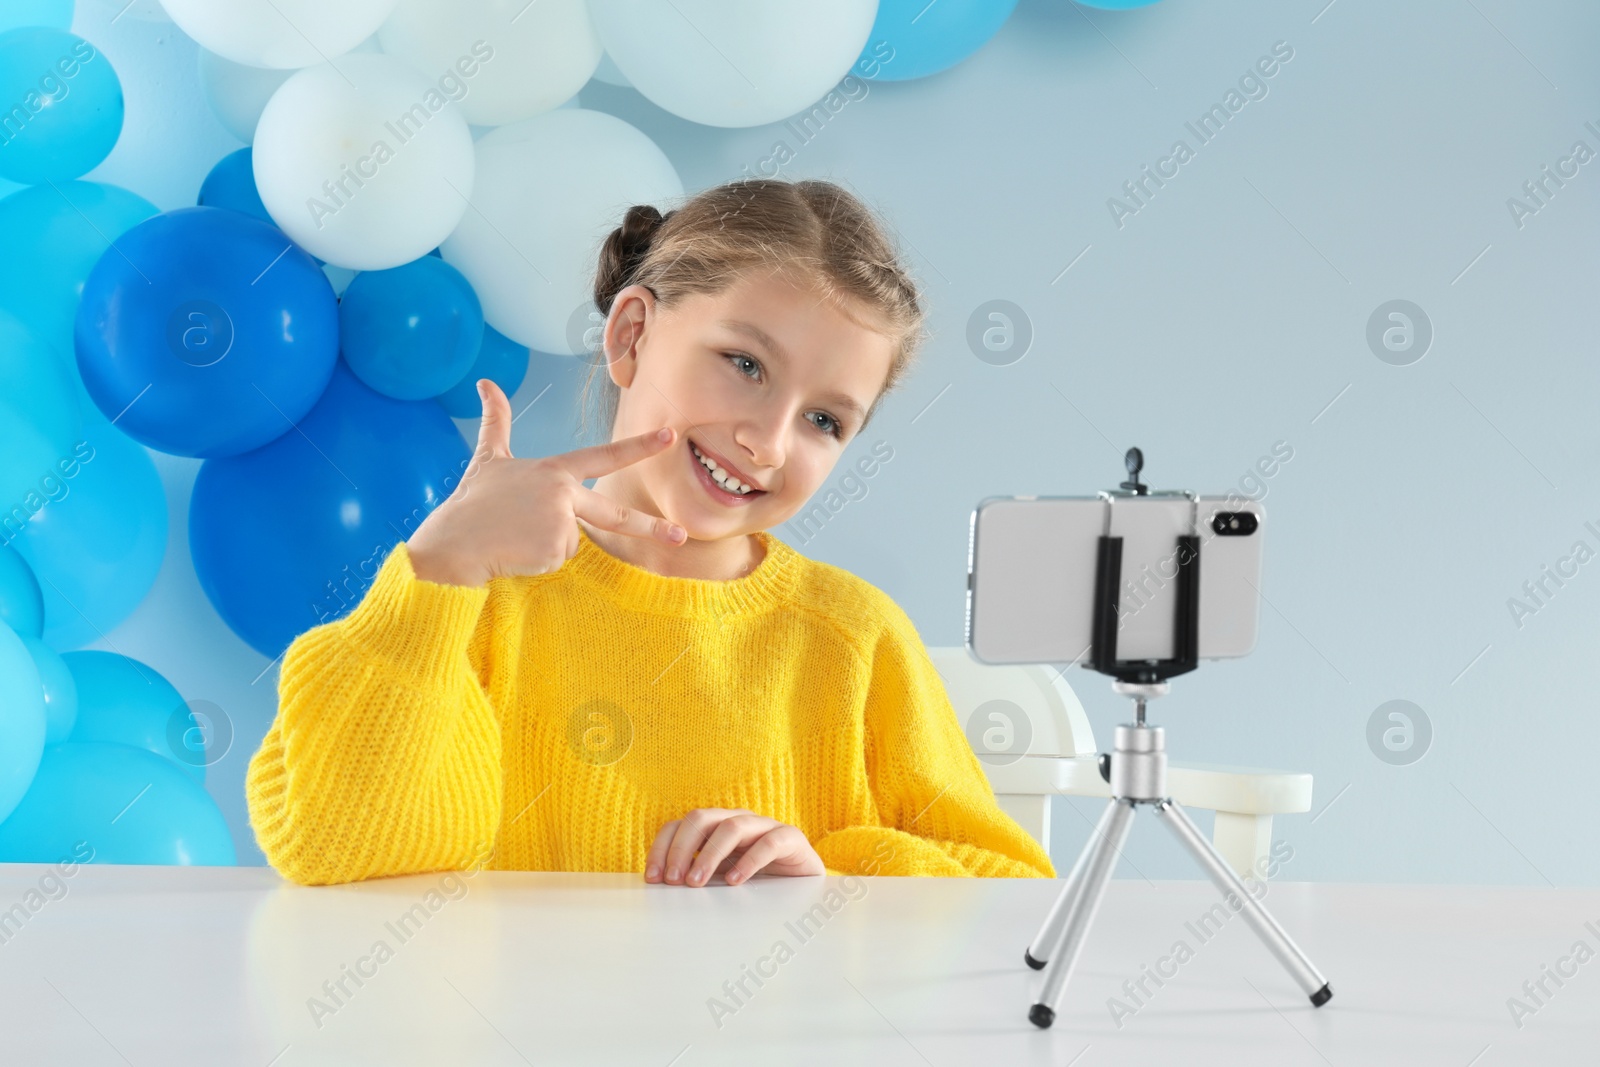 Photo of Cute little blogger recording video at table